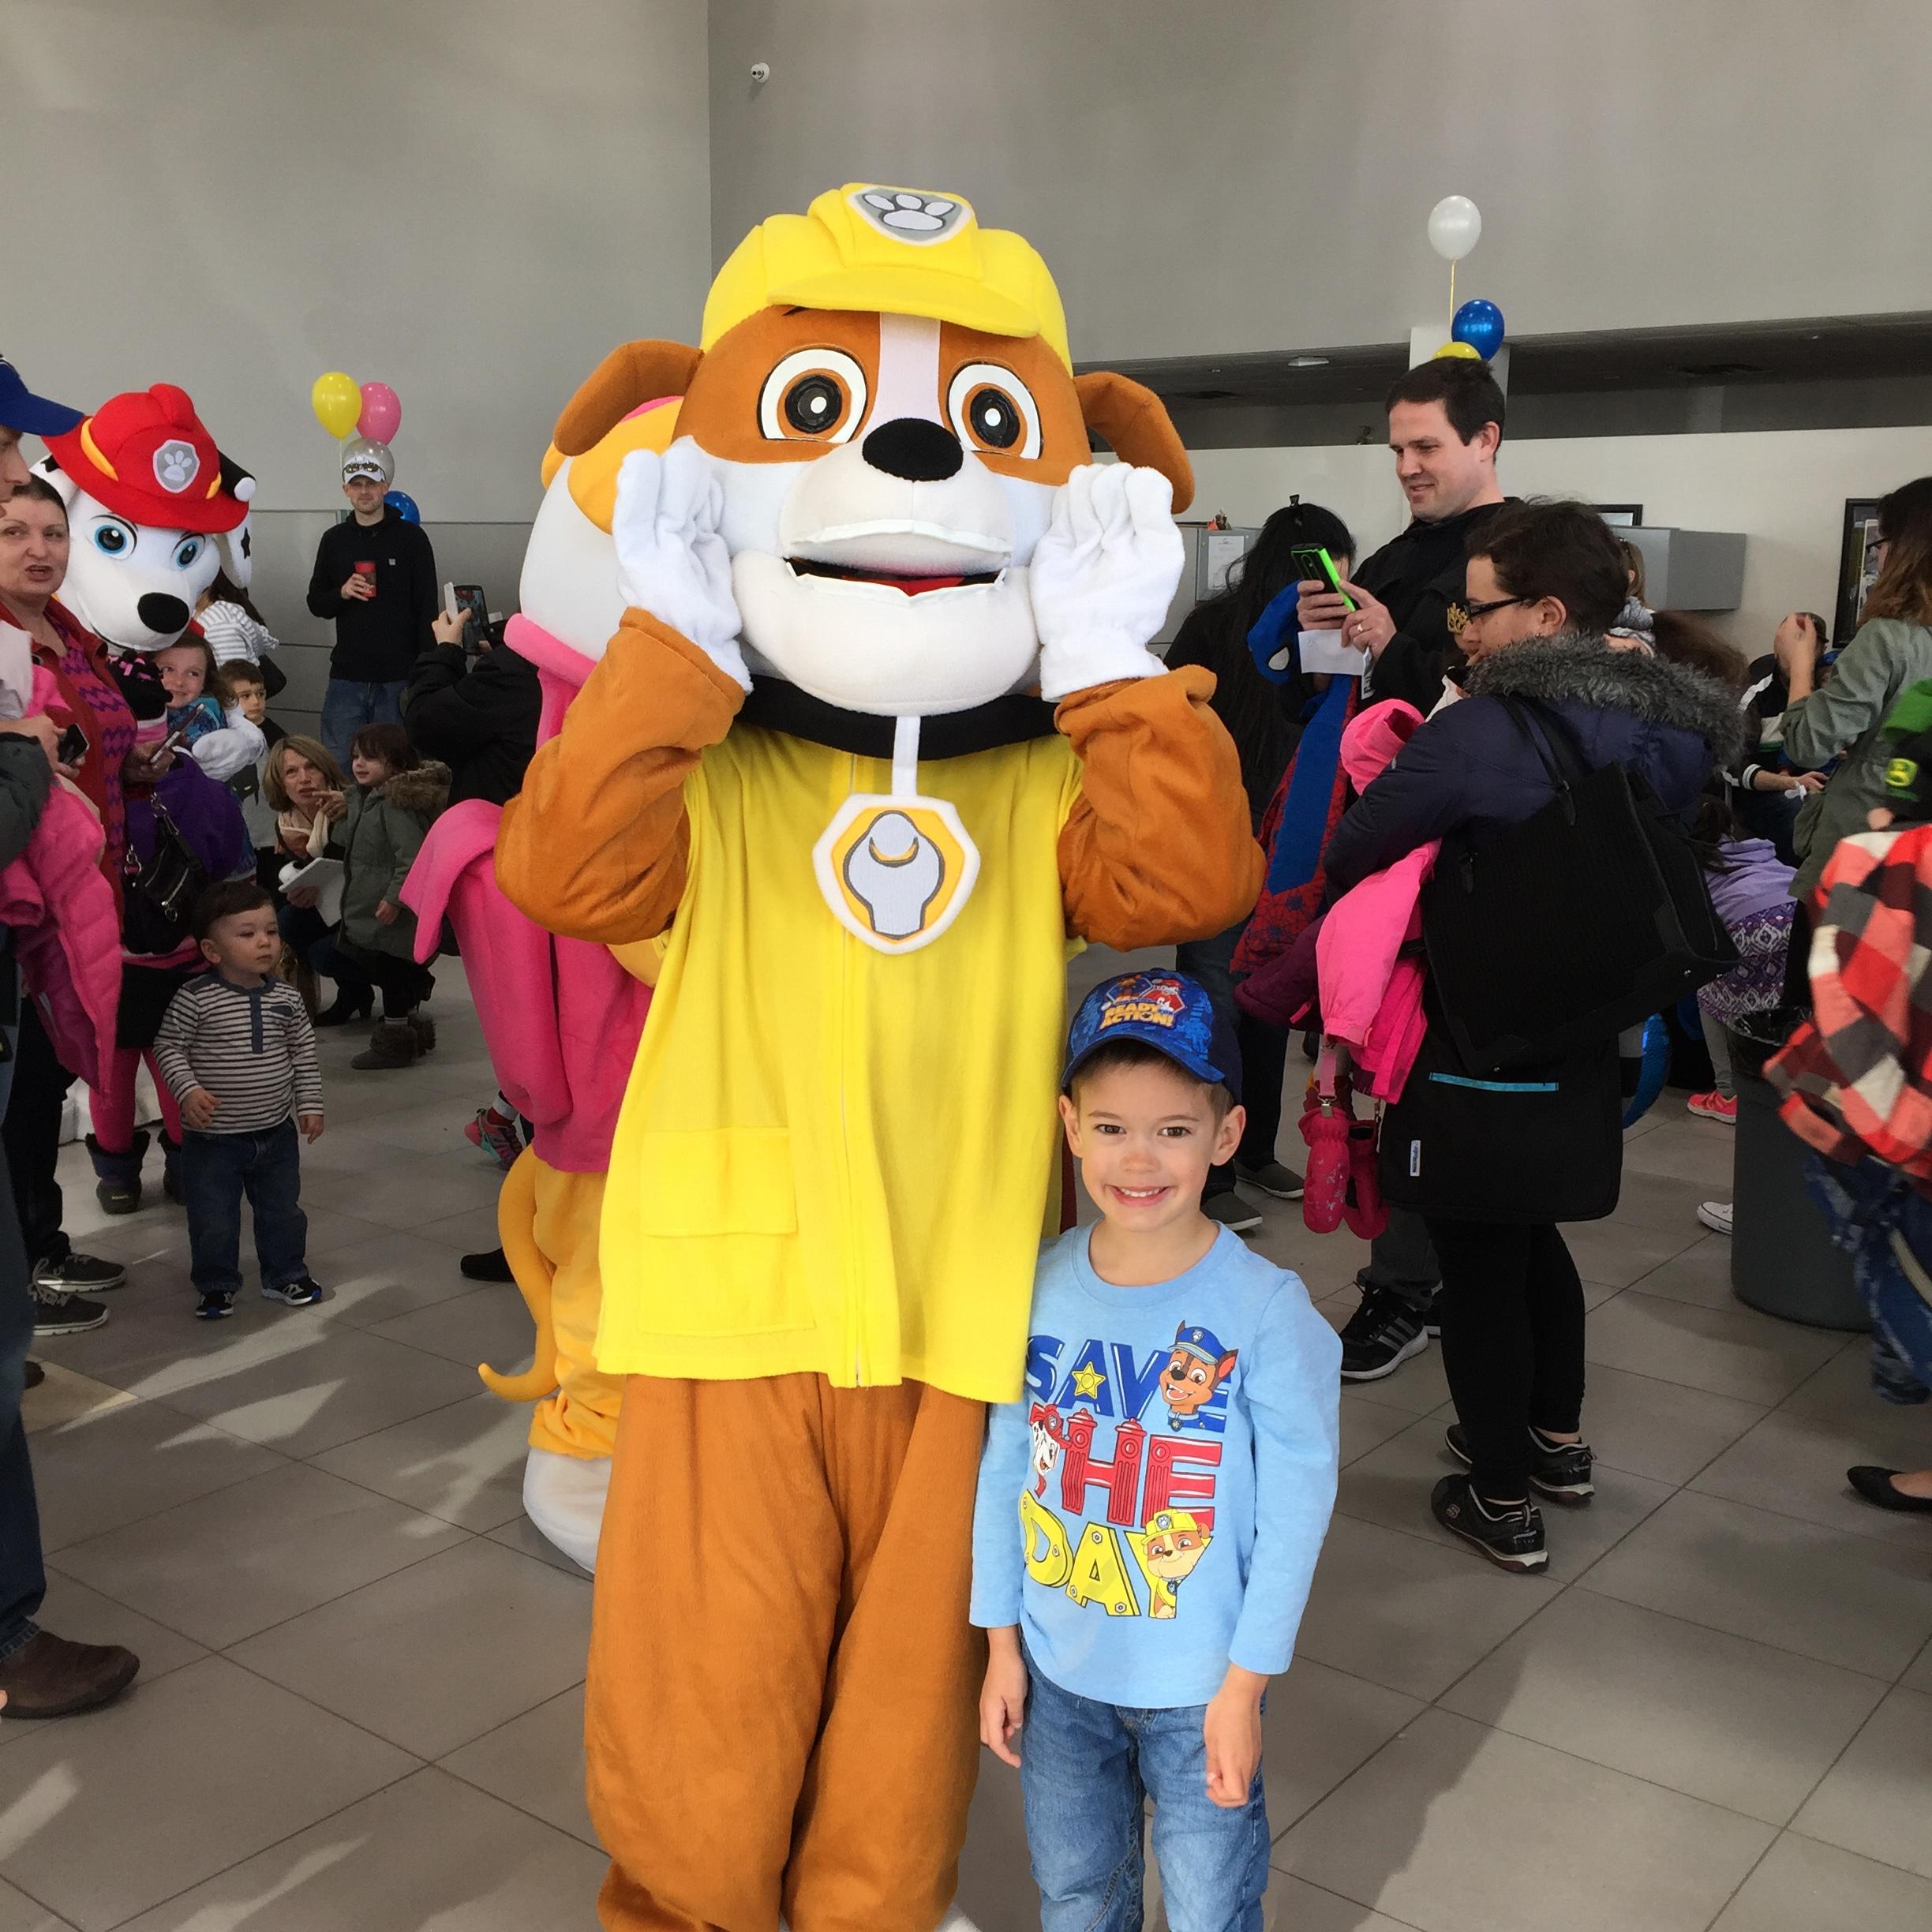 Paw Patrol at Fines Ford Lincoln